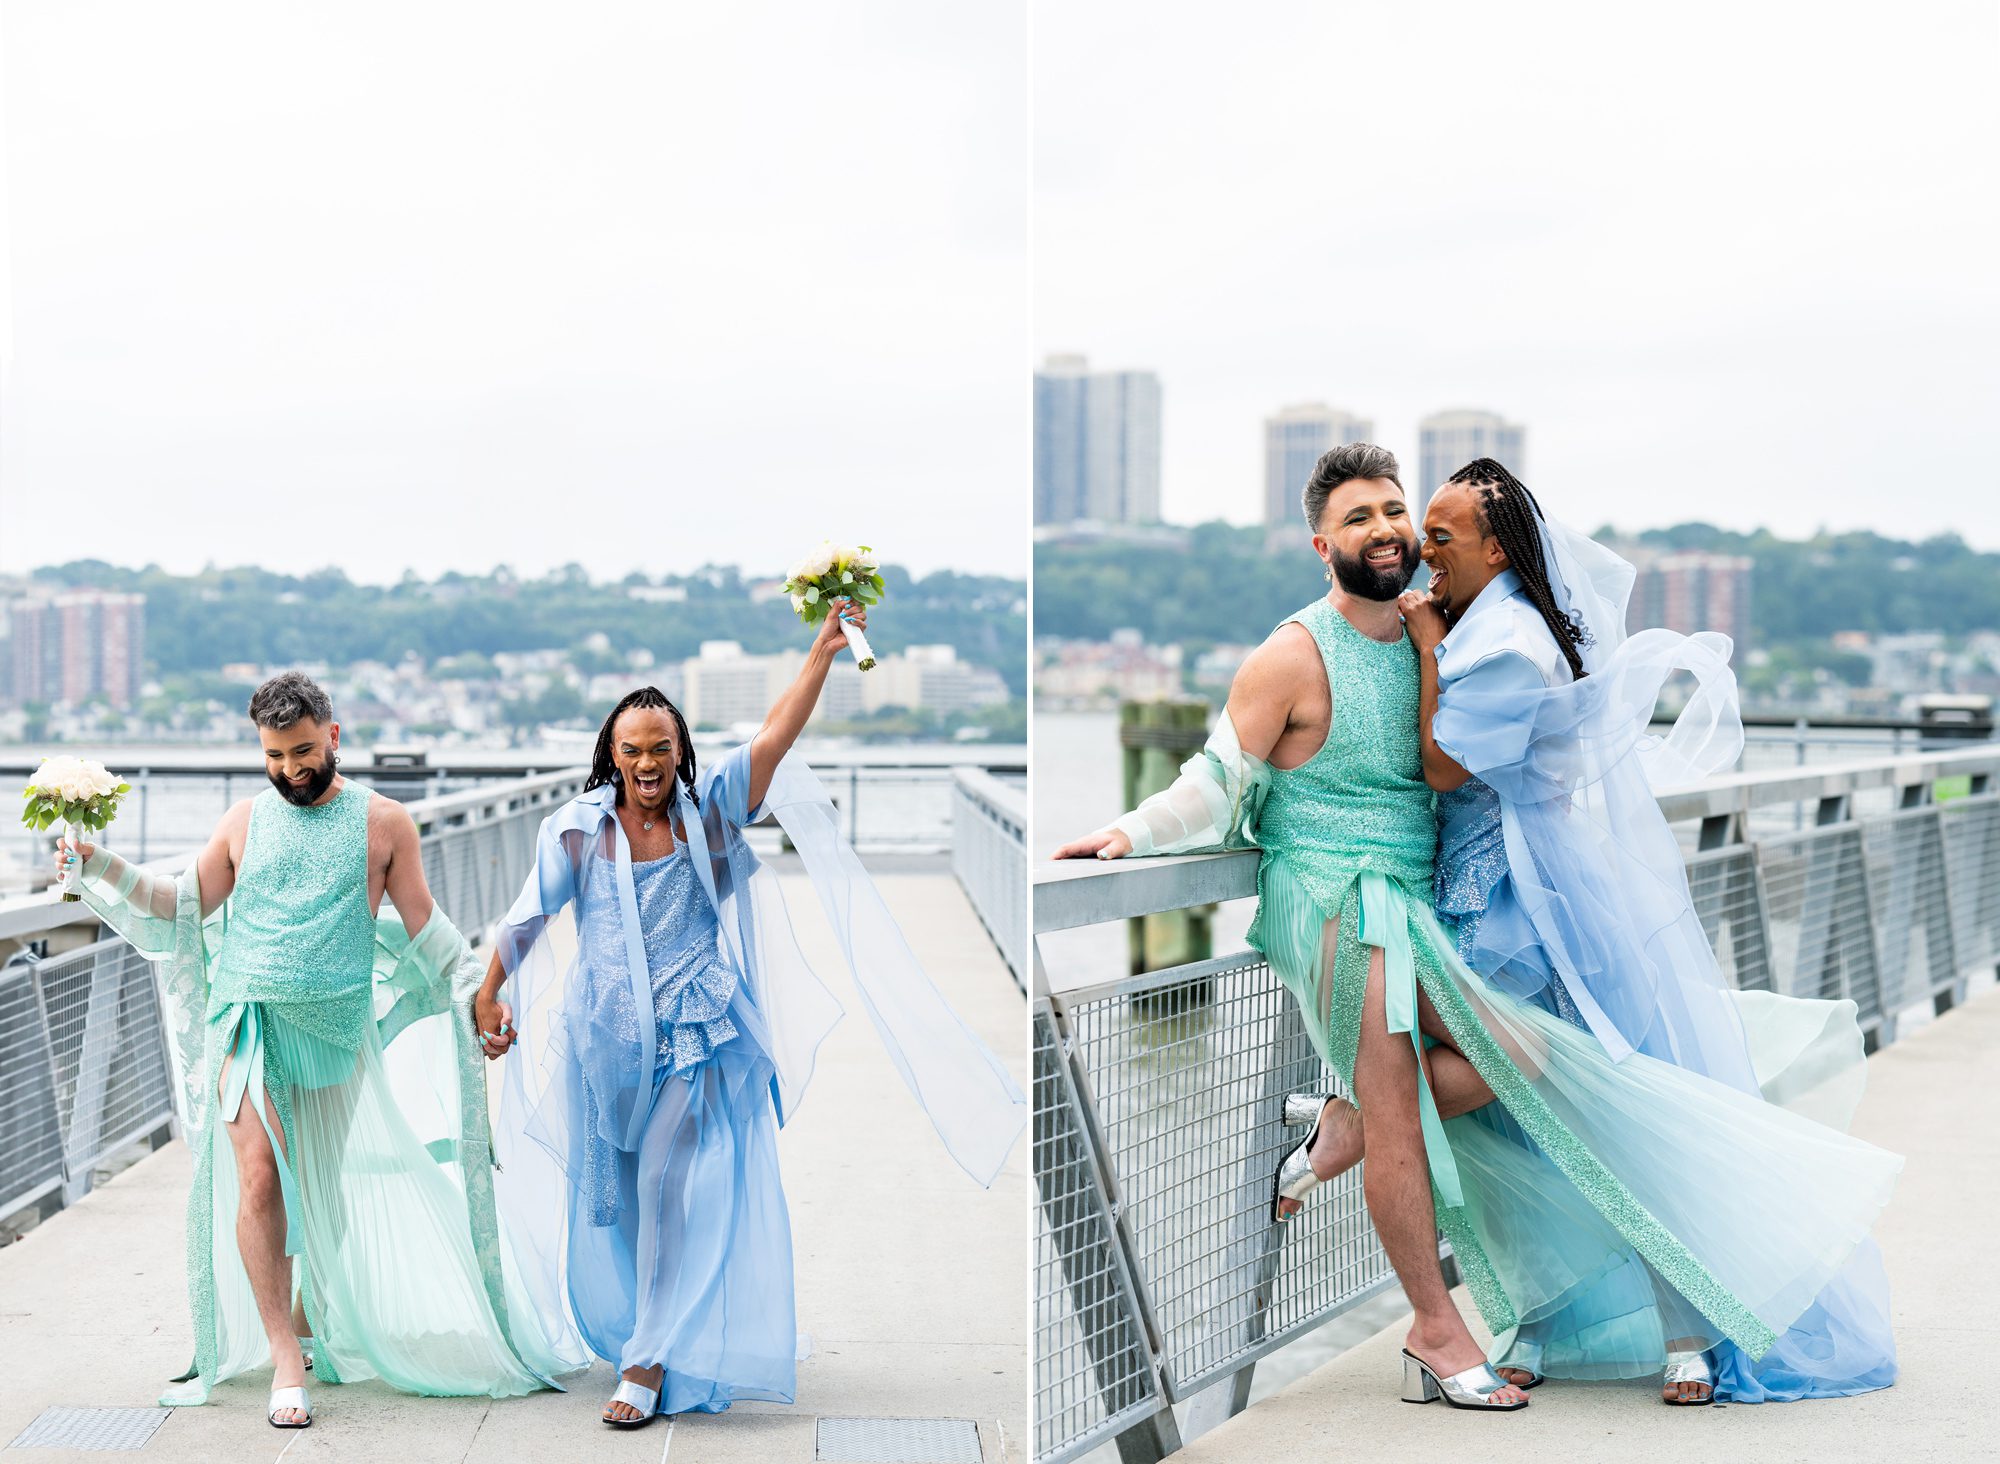 A queer couple taking wedding photos in sparkly outfits along the Hudson River in NYC. 